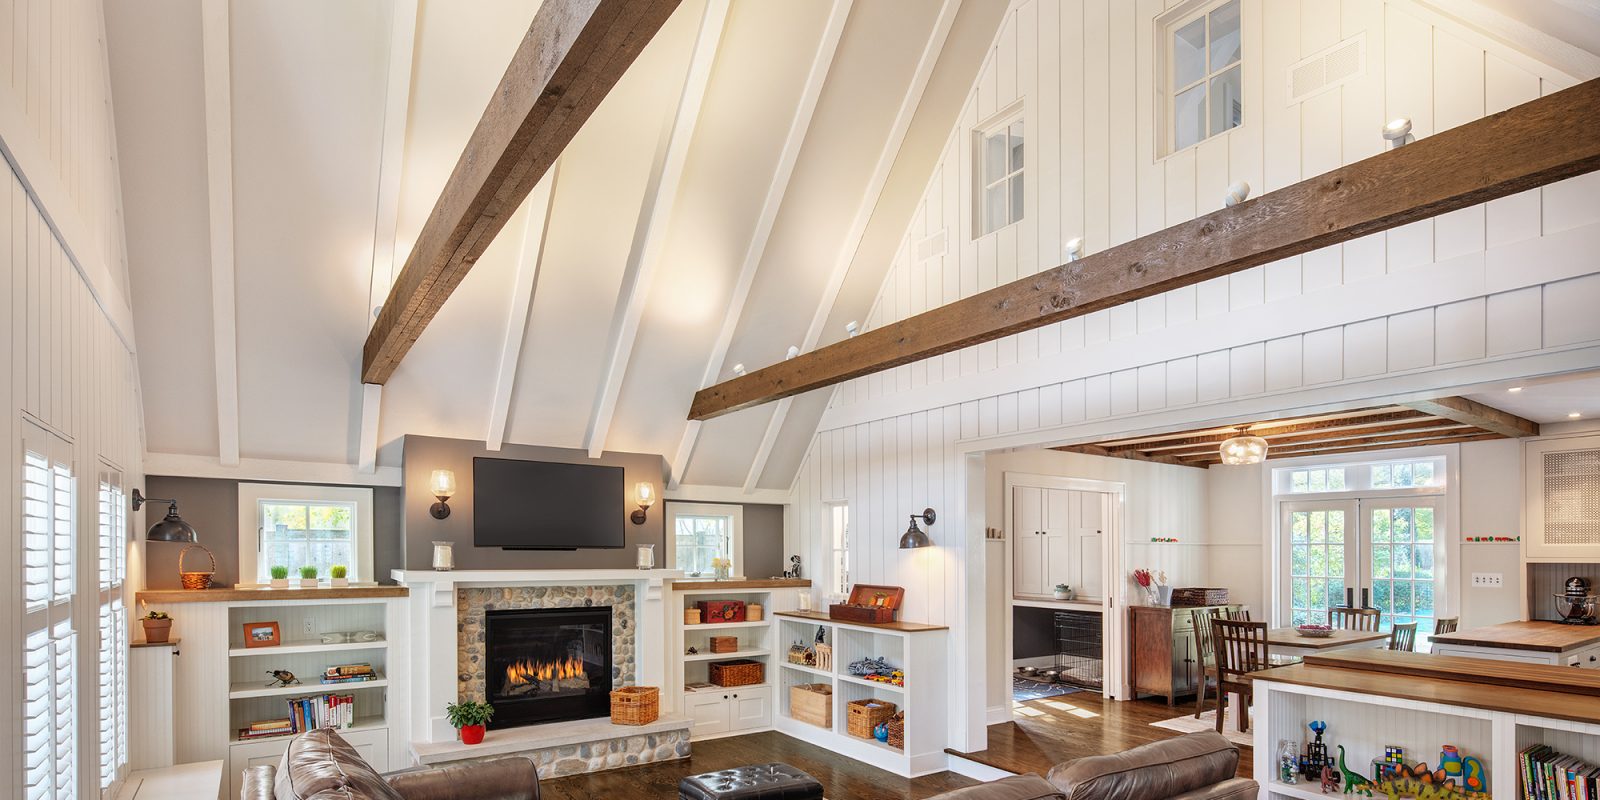 Entertainment space created in the original garage with soaring ceiling and exposed beams